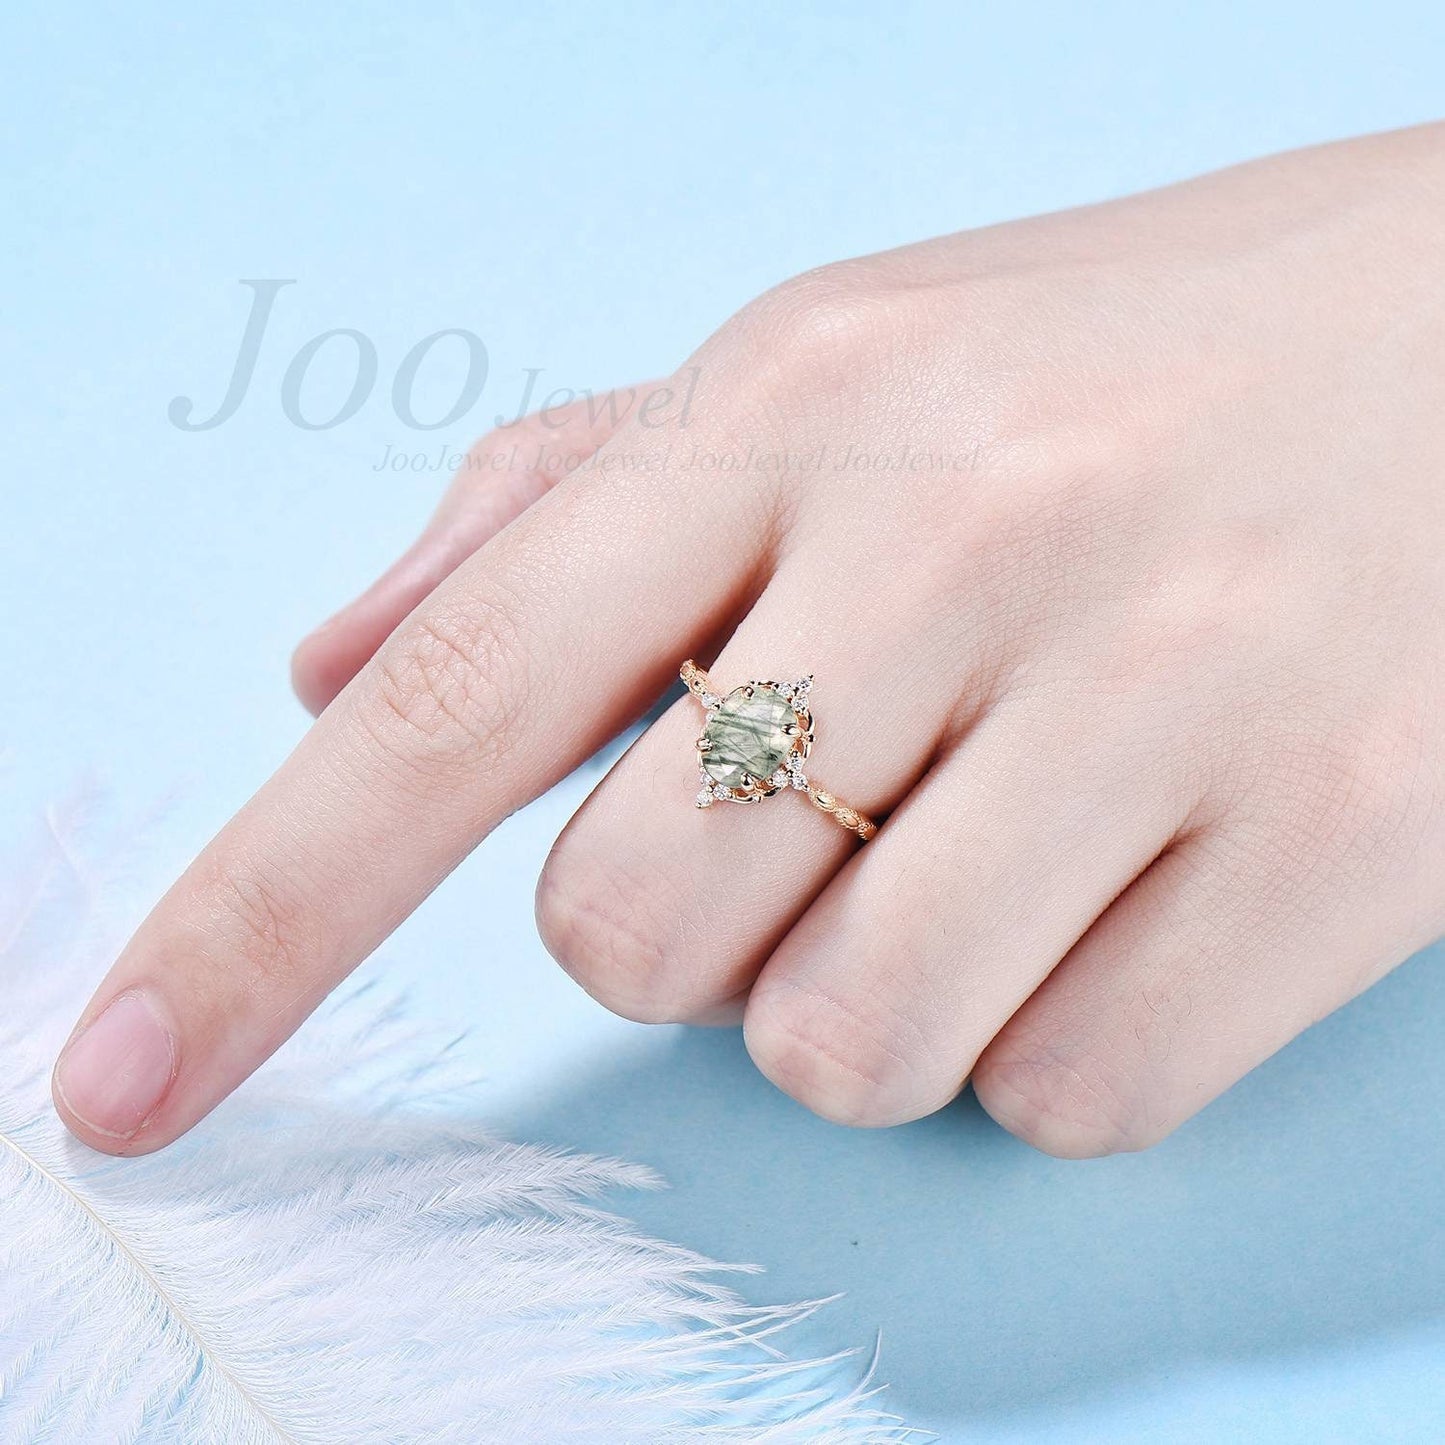 Natural Green Rutile Quartz Ring Unique Oval Solitaire Ring Green Crystal Ring ¡°PROTECT YOU FOREVER¡± Engagements Ring Anniversary Gift Women